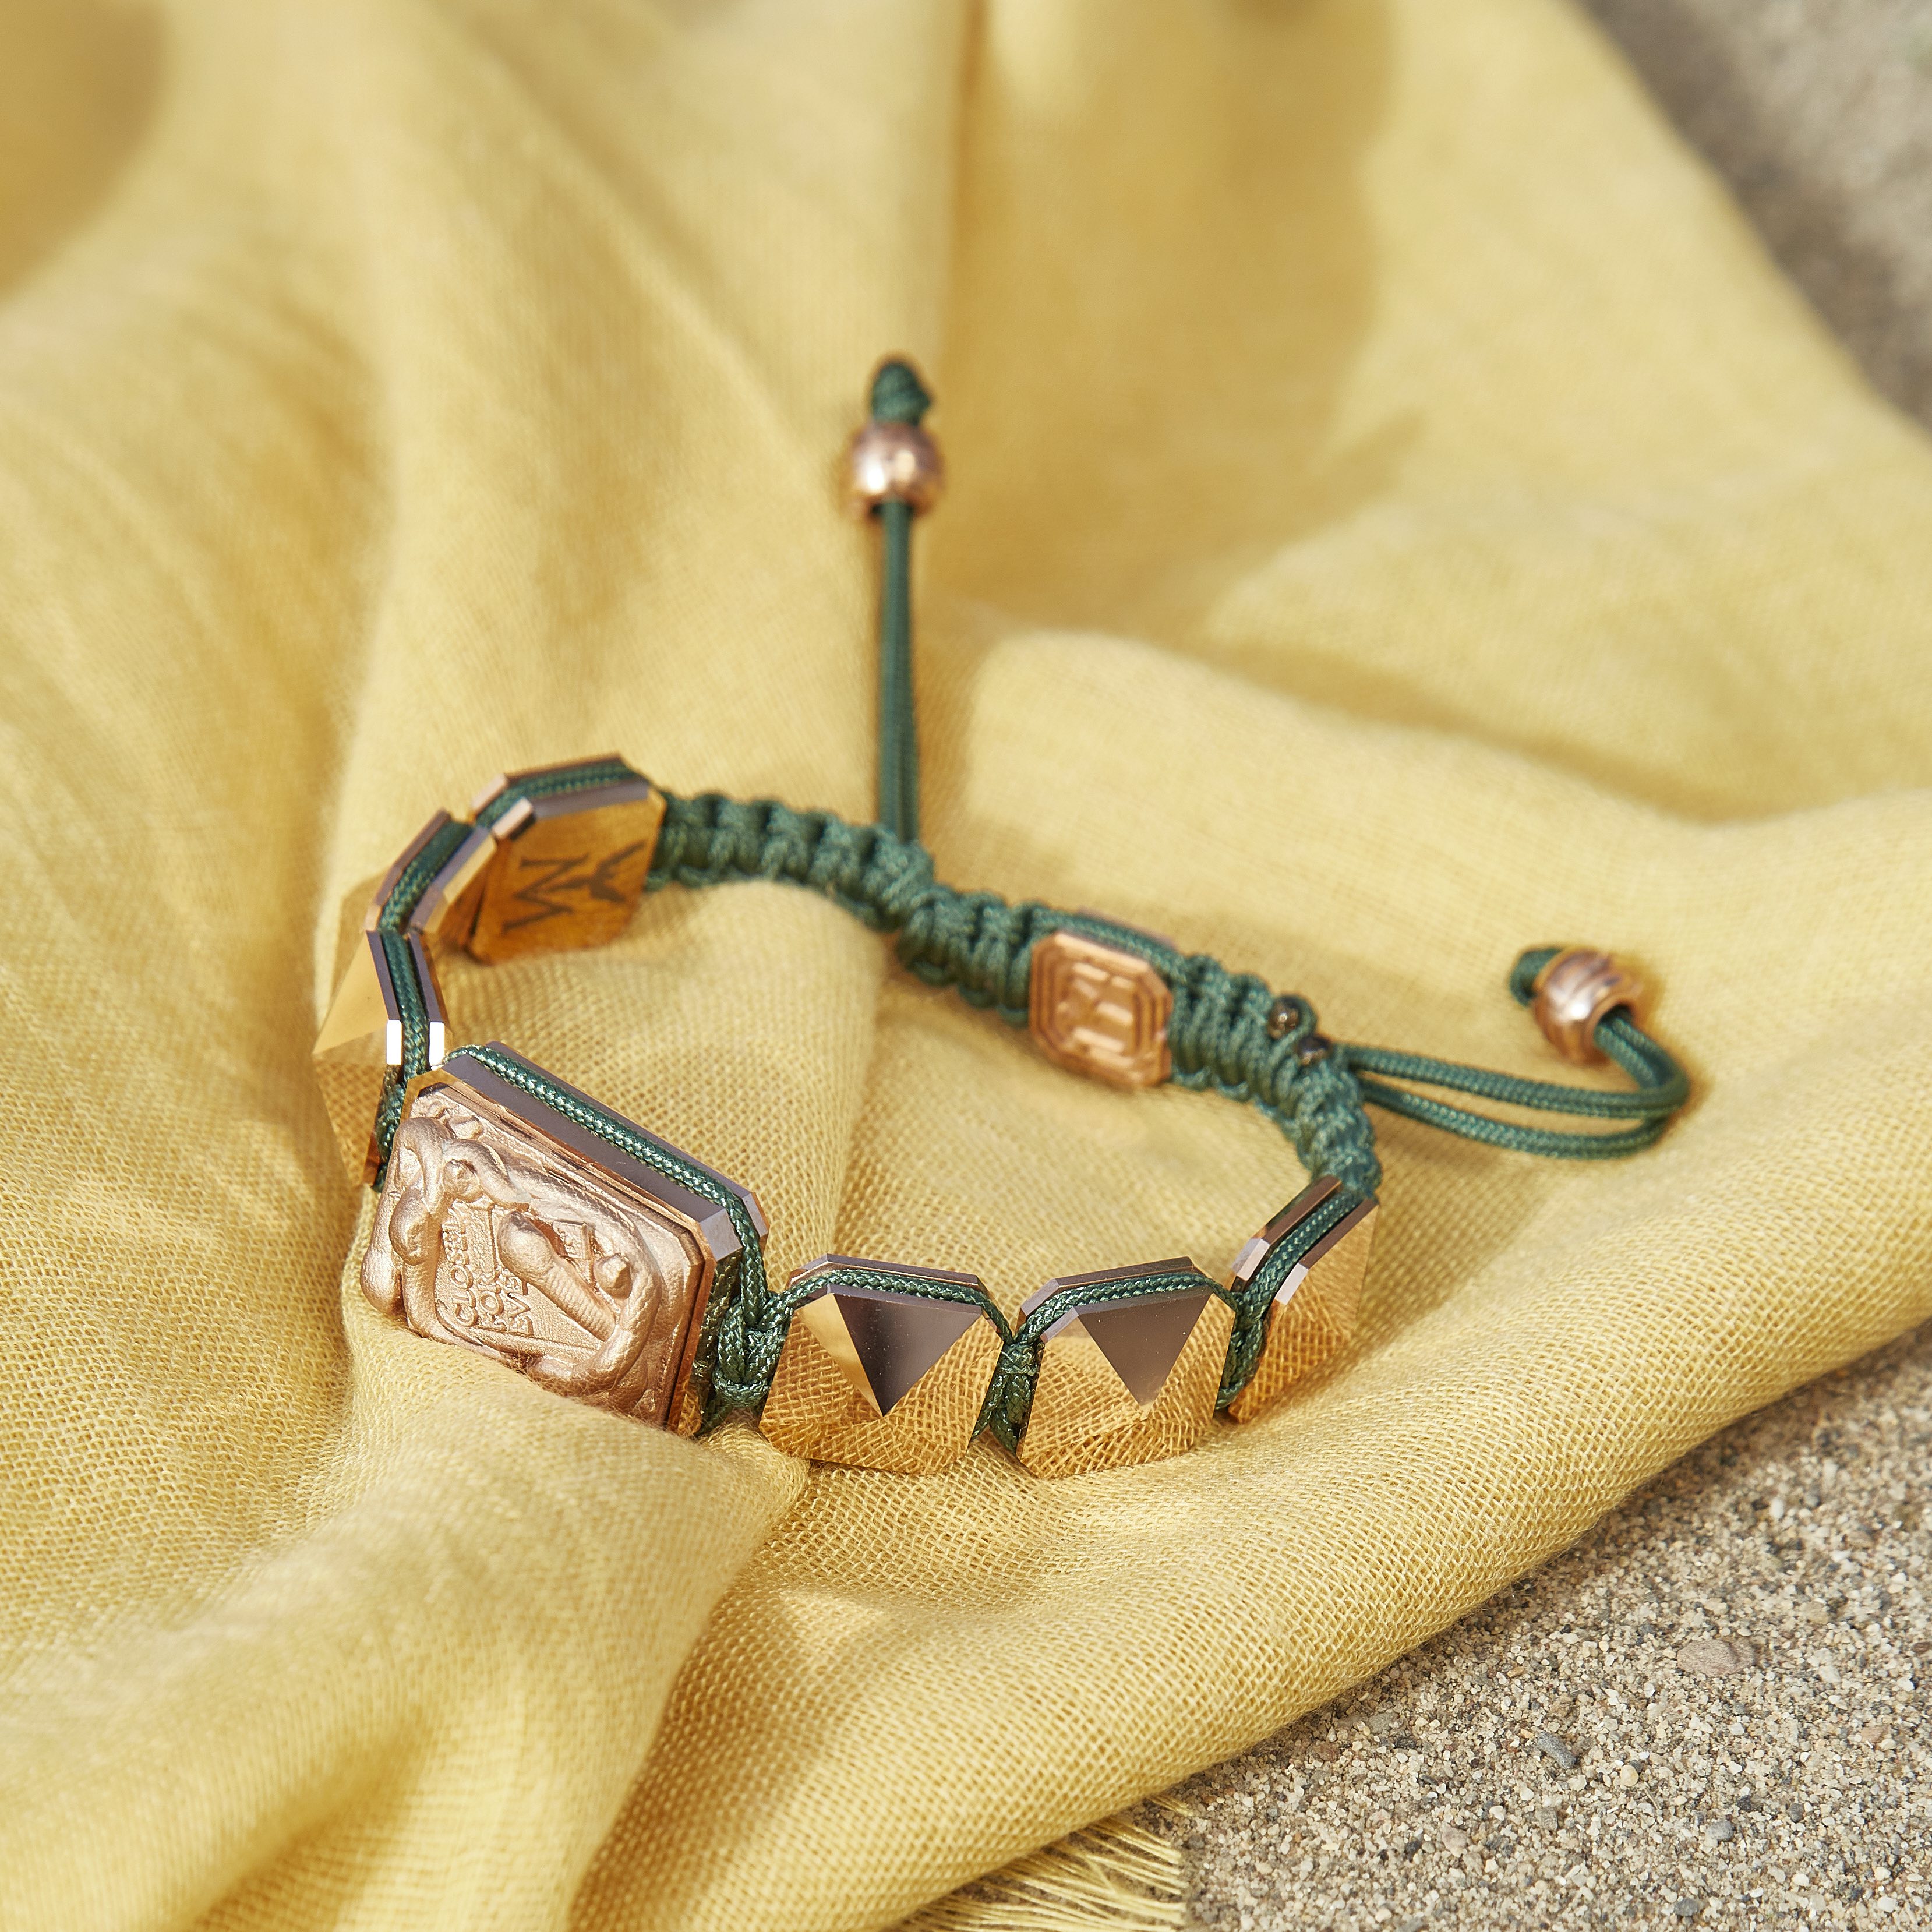 Forever In My Heart bracelet with ceramic and sculpture finished in 18k Rose Gold complemented with a dark green coloured cord.